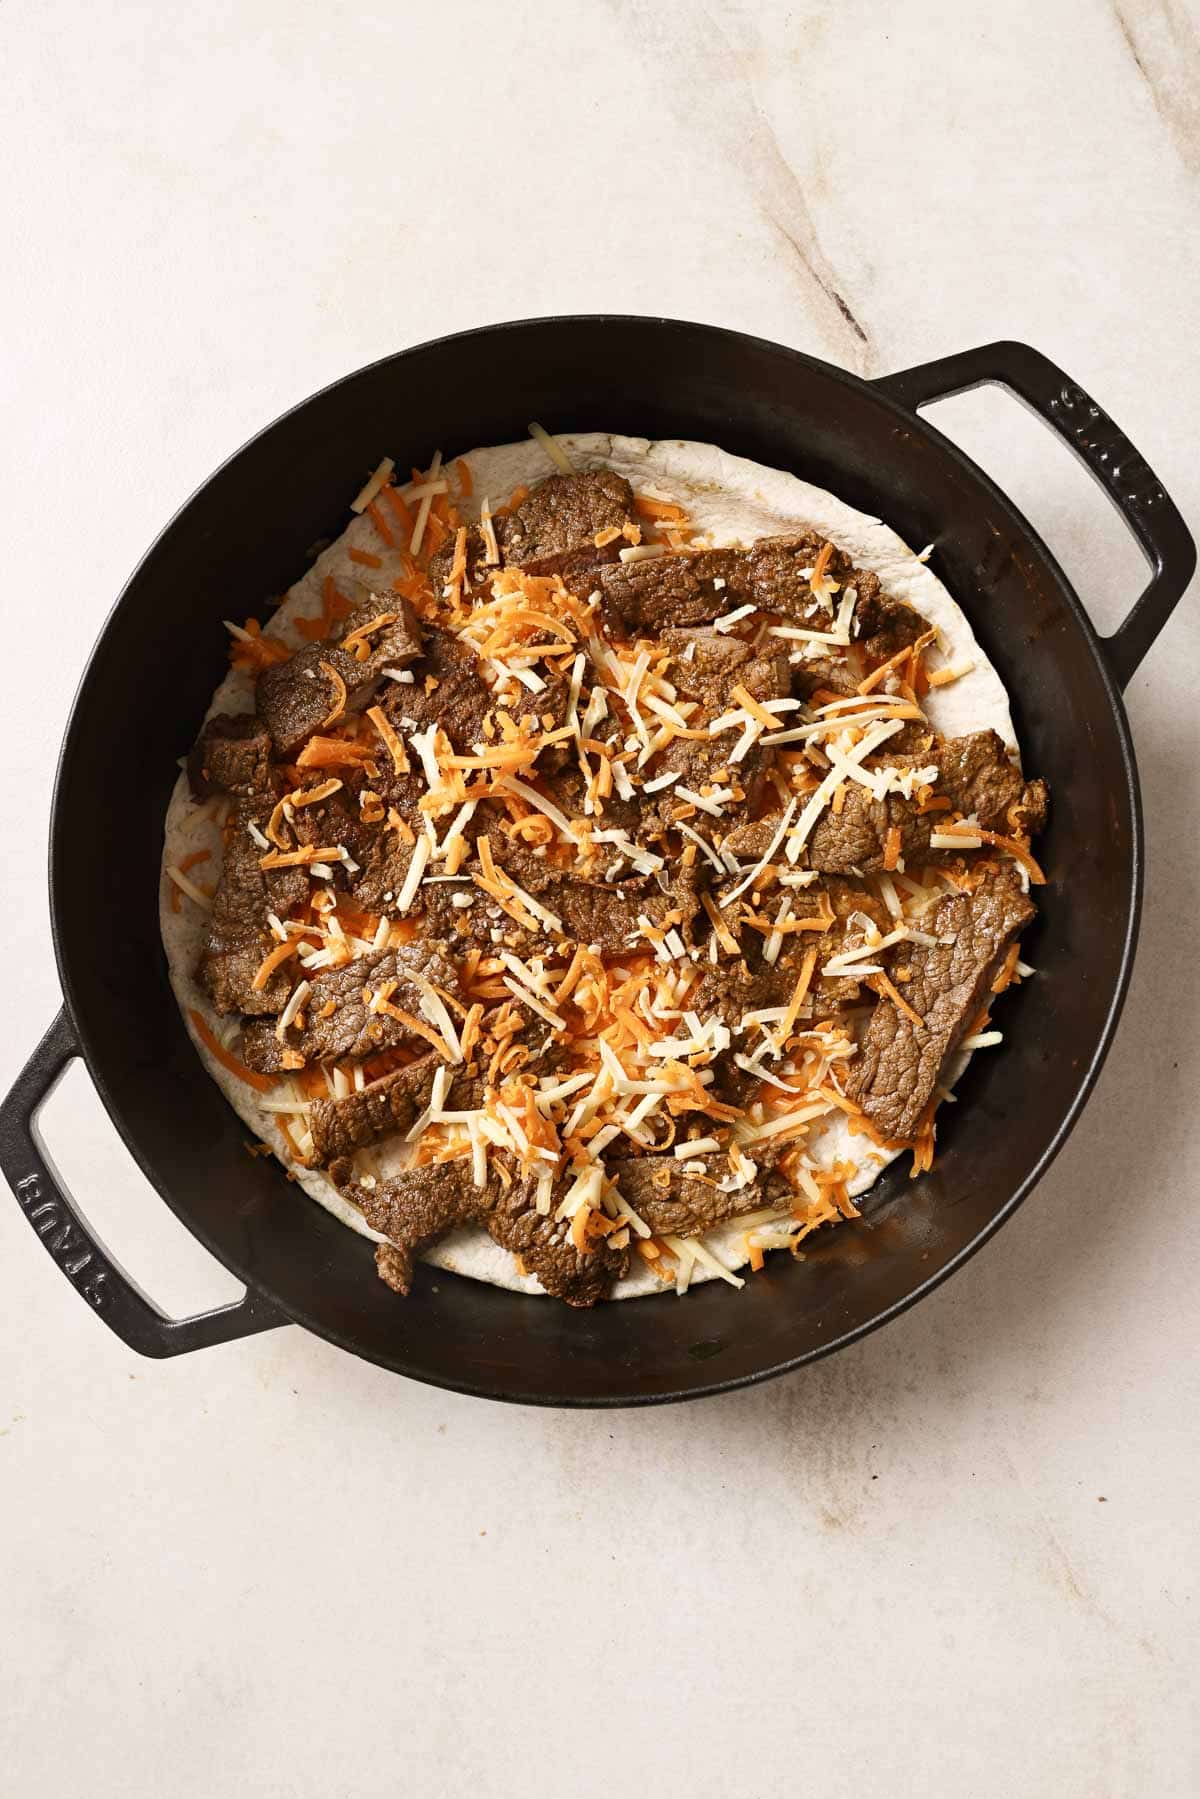 A cast iron skillet with a tortilla, cheese, and sliced carne asada.